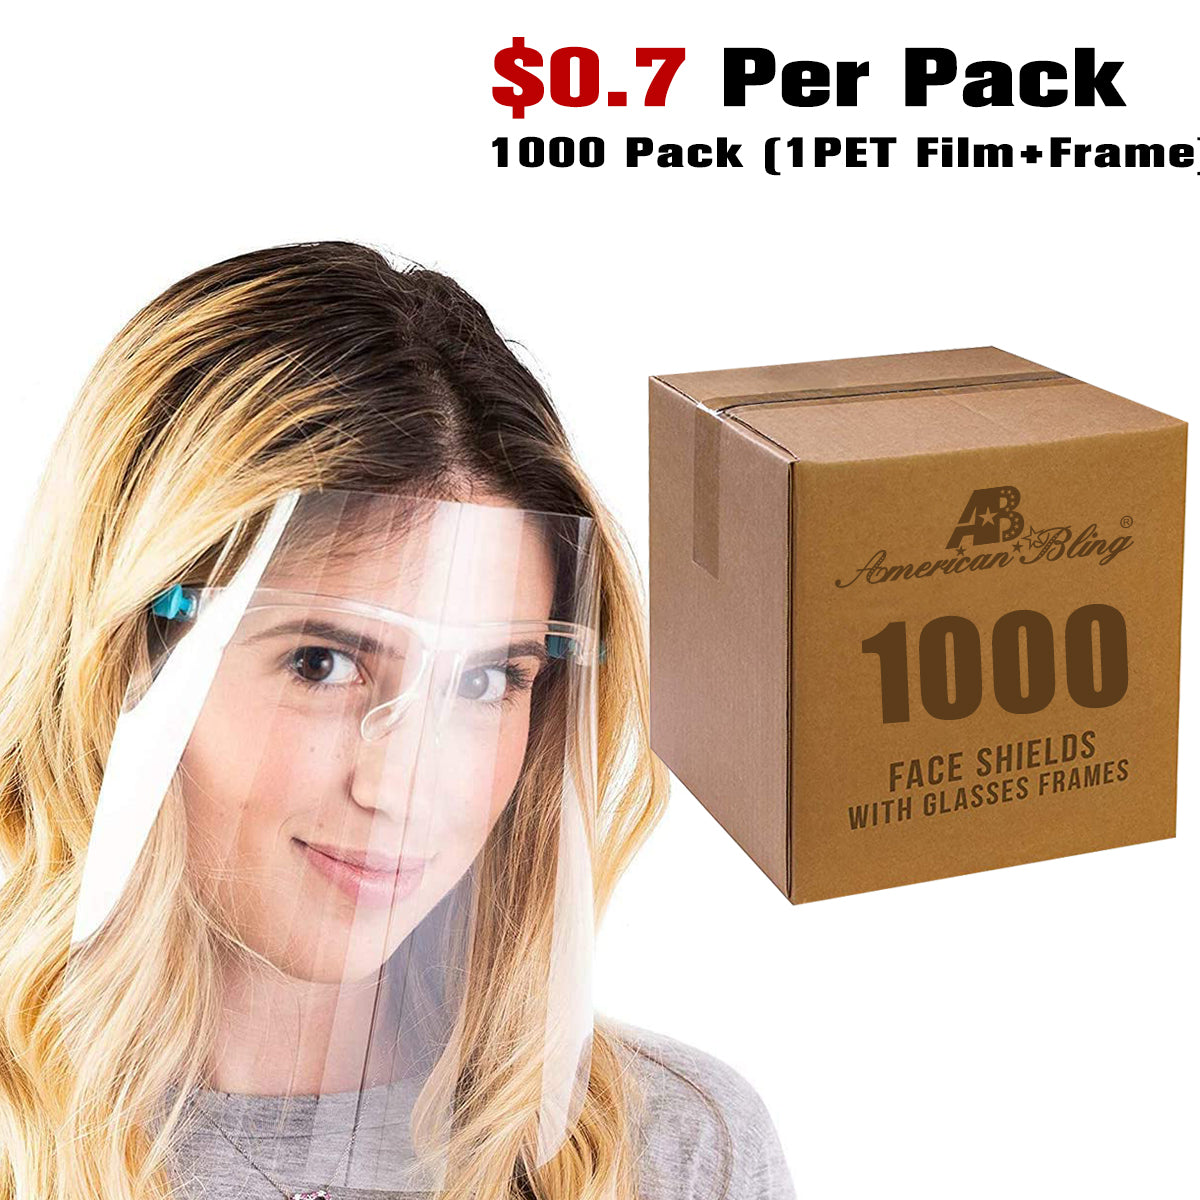 1000Pack Safety Face Shield Anti-Fog Face Visor 1000 Pcs Replaceable Shields & 1000 Pairs Reusable Goggles Protect Eyes and Face